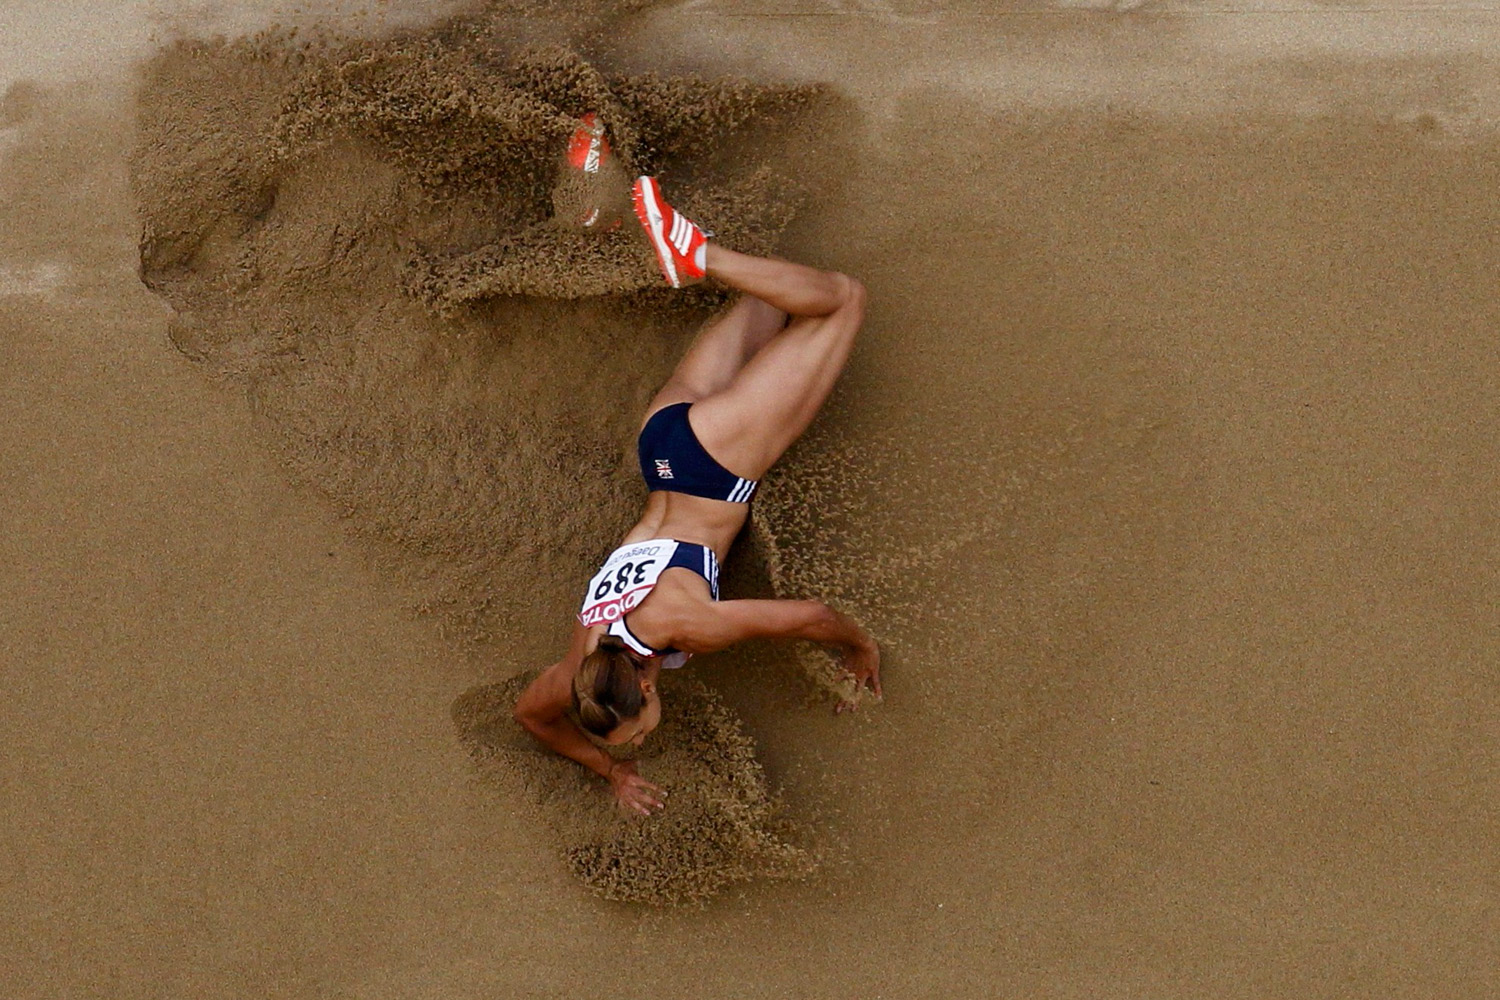 Jessica Ennis of Britain competes during the long jump event of the heptathlon at the IAAF World Championships in Daegu, South Korea, August 30, 2011.